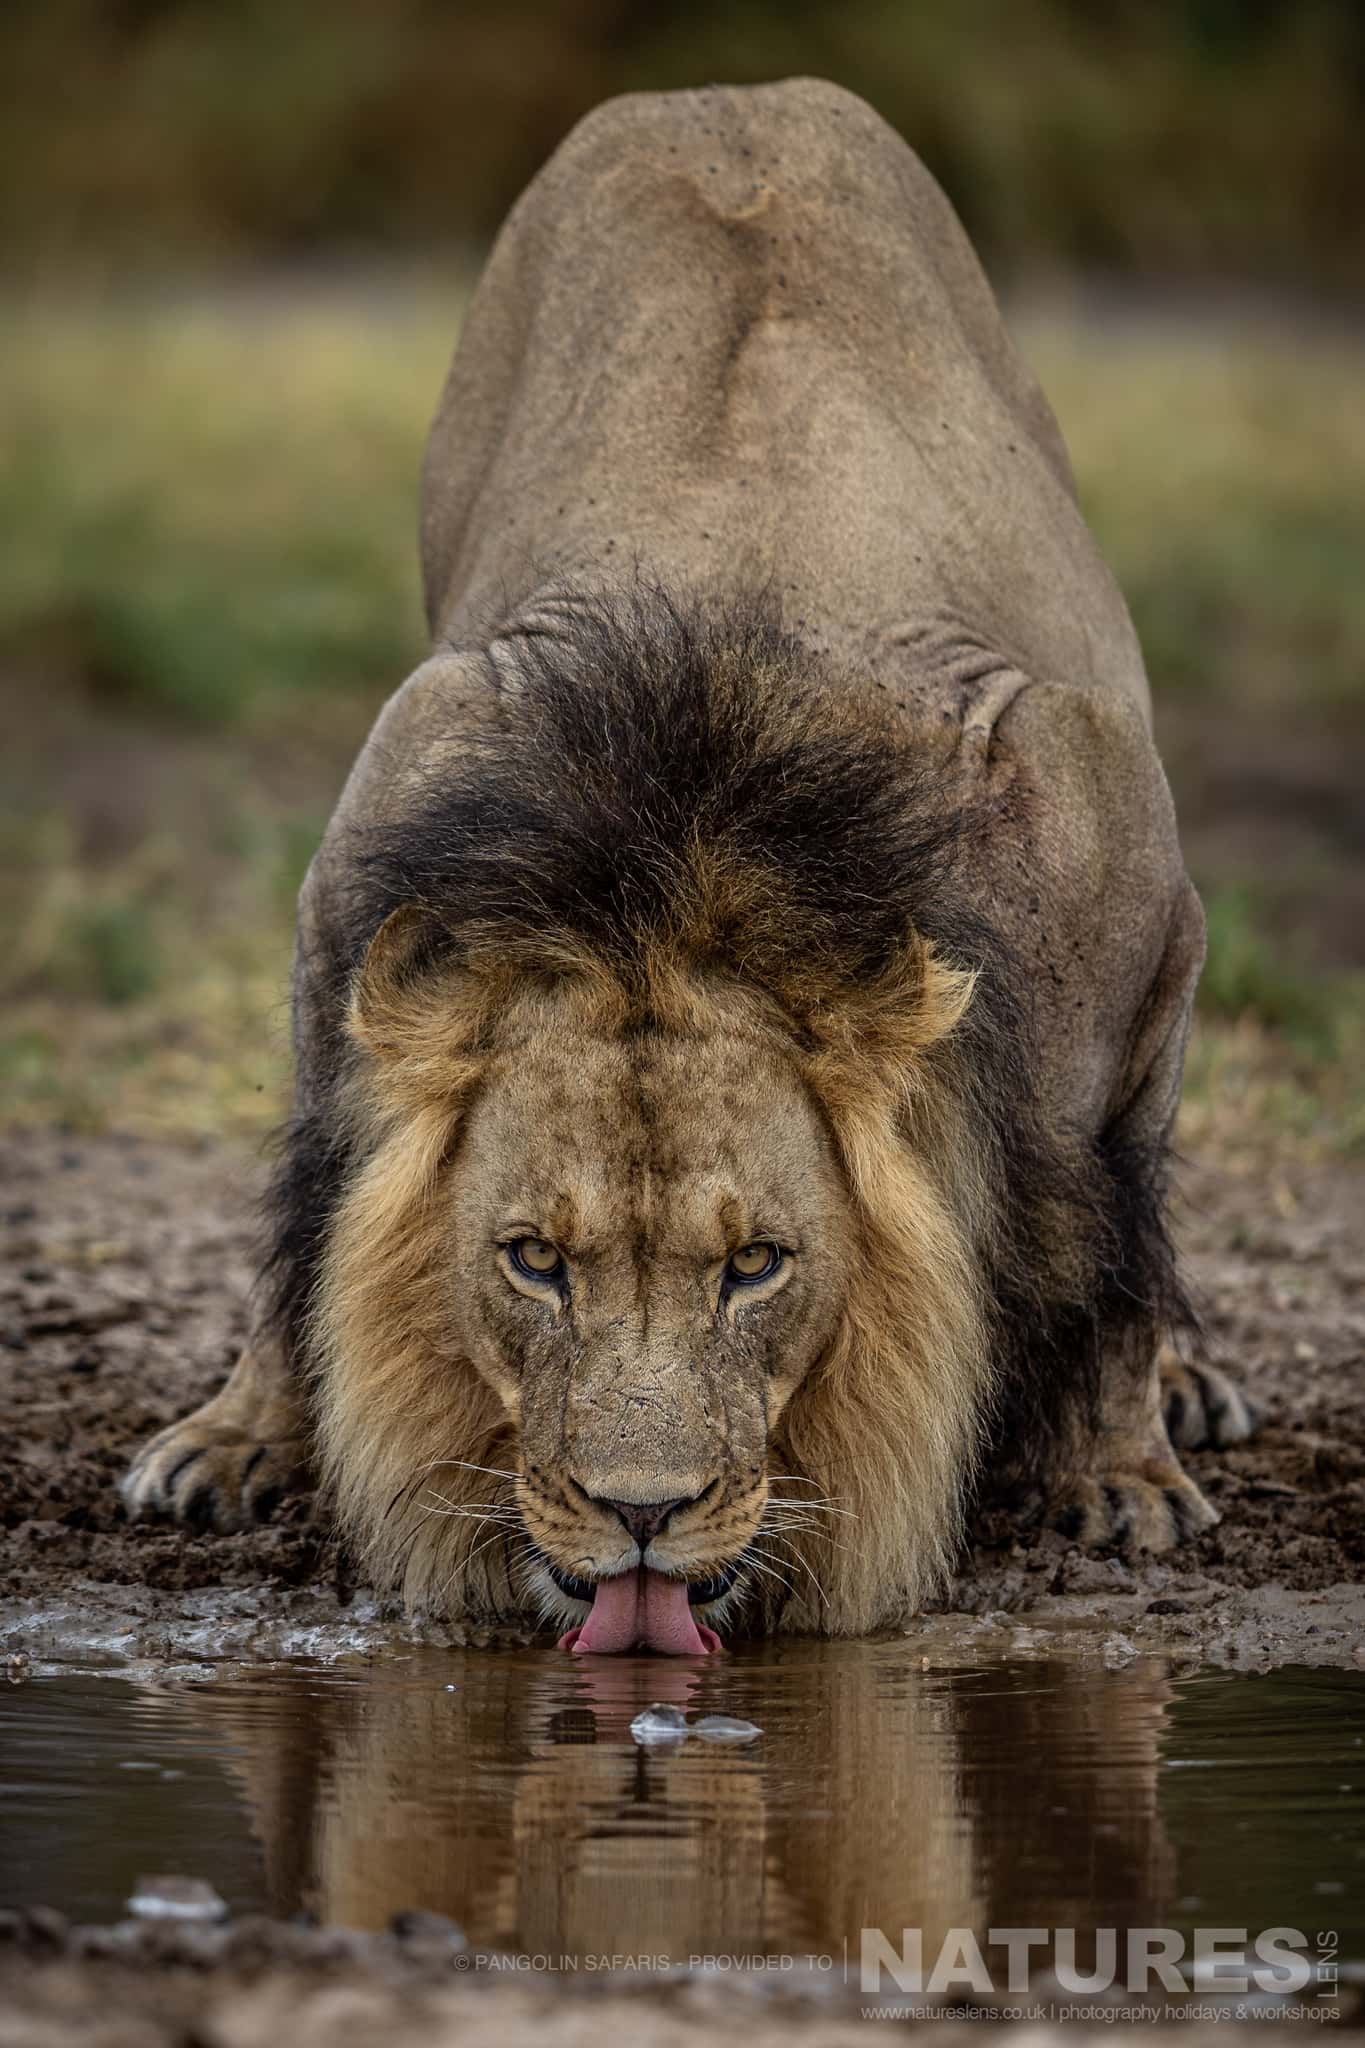 A Drinking Lion Typical Of The Kind Of Image We Hope To Capture During The Wildlife Of The Chobe River & Dinaka Private Conservancy Photography Holiday